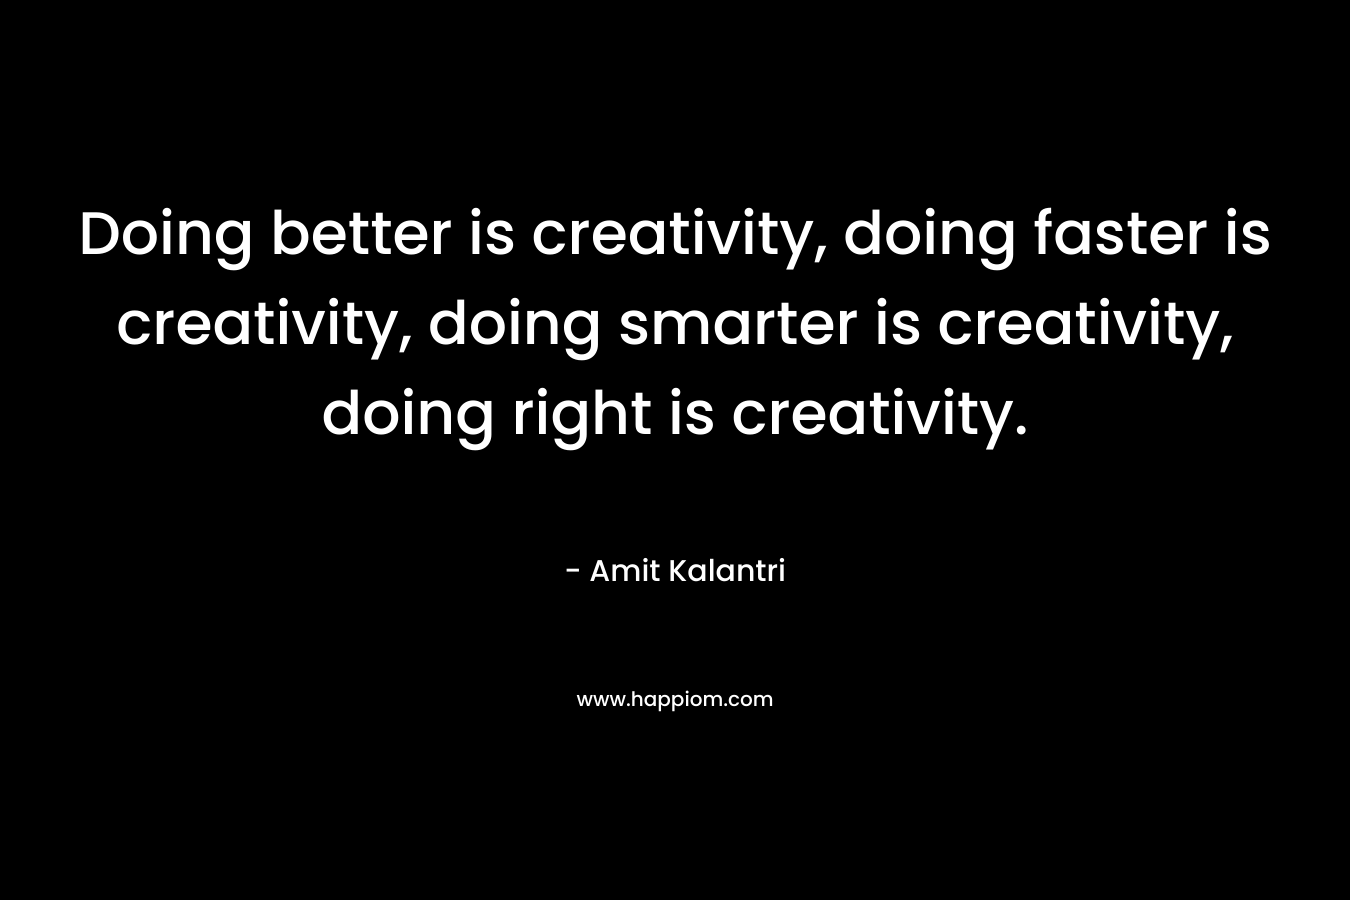 Doing better is creativity, doing faster is creativity, doing smarter is creativity, doing right is creativity.